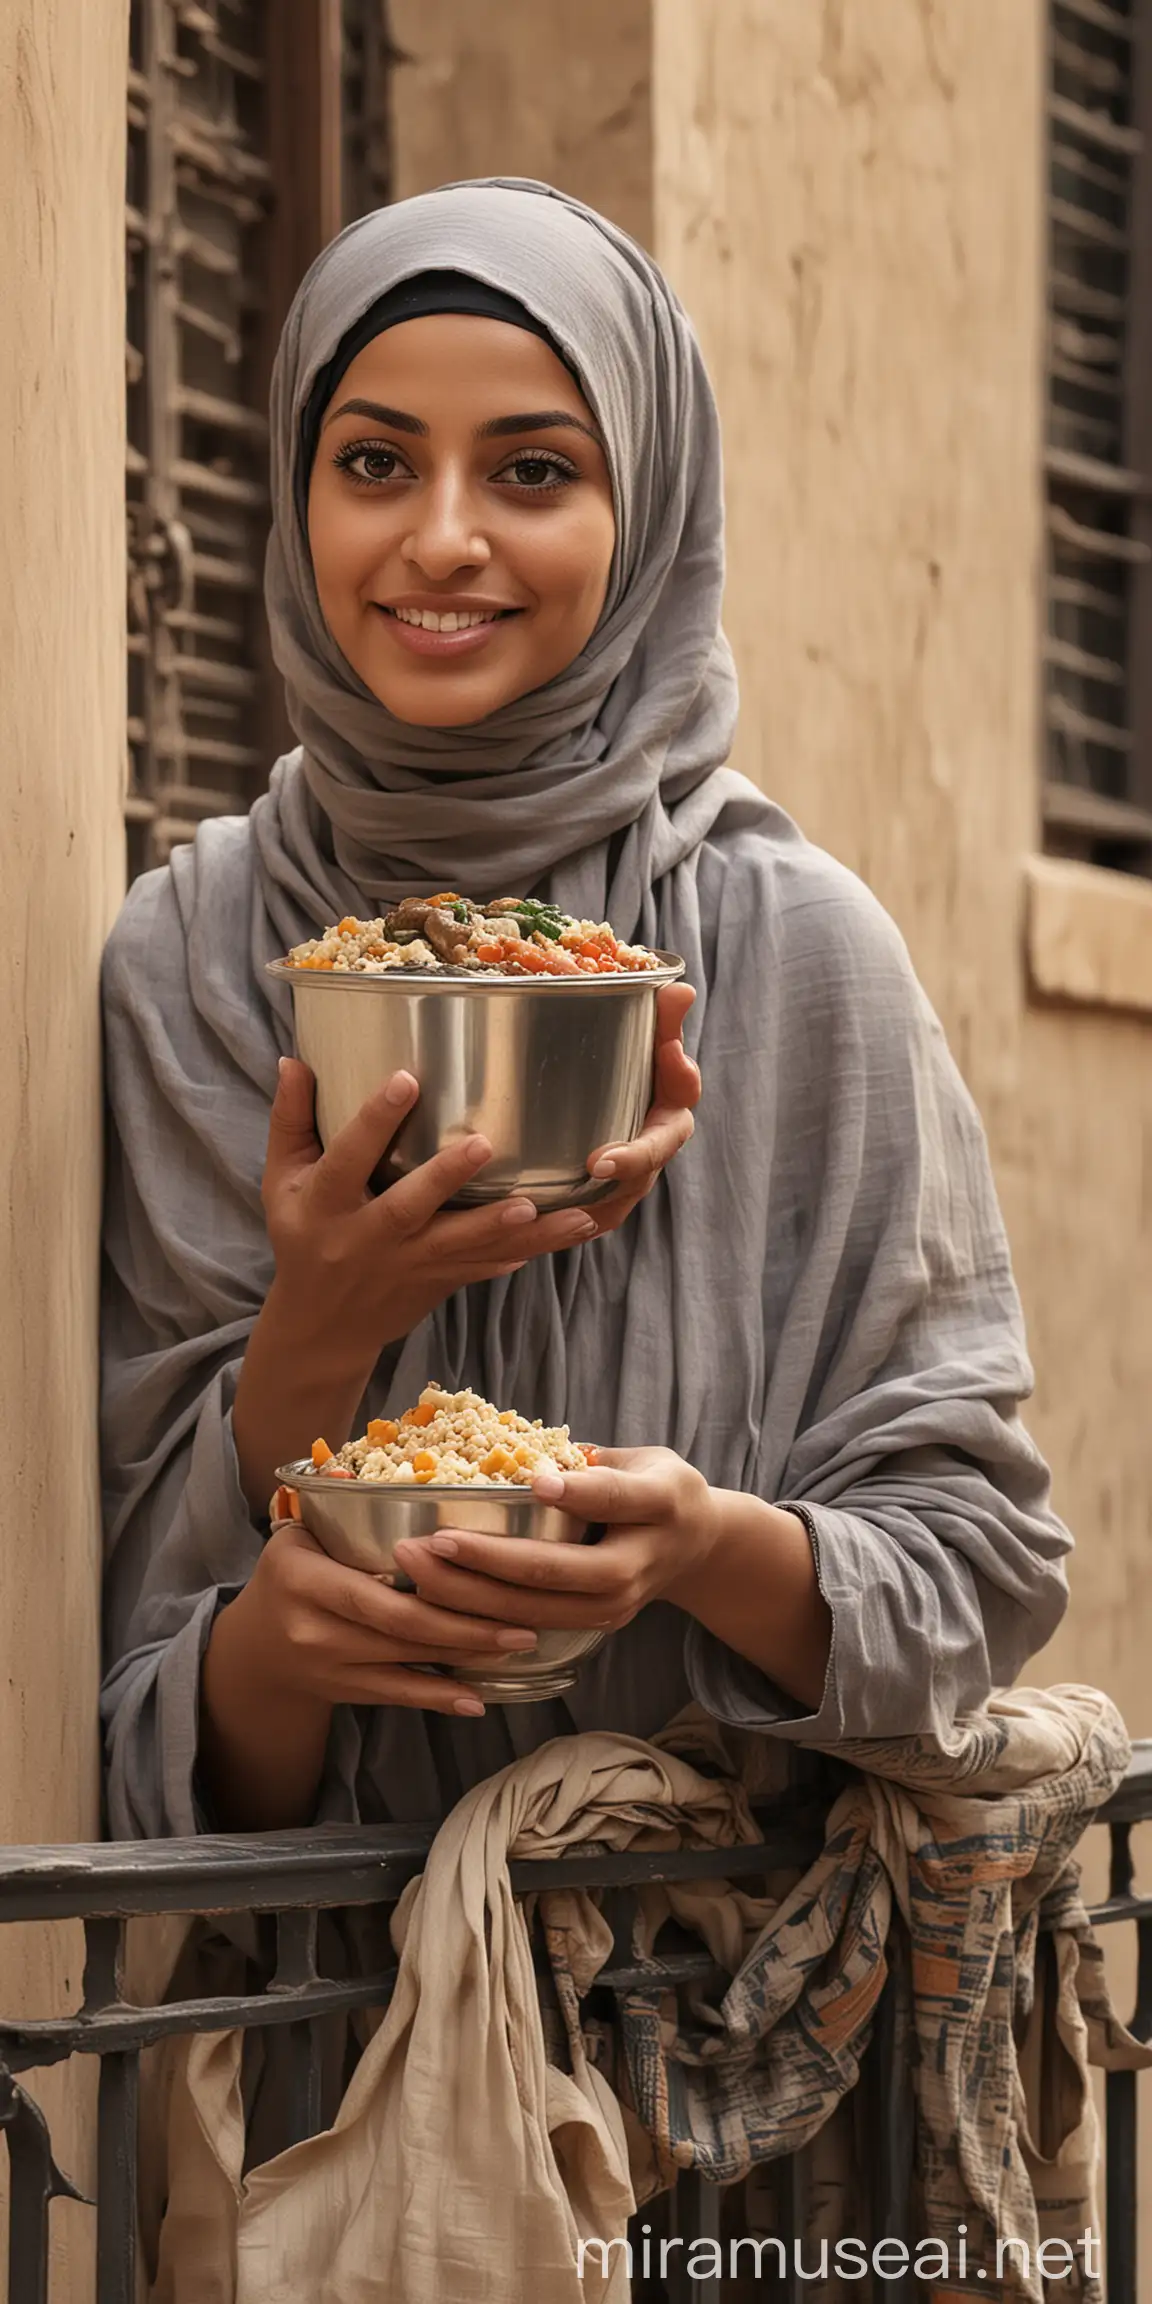 Can you please help me generate a portrait of a middle age, modern egyptian woman wearing a hijab who is passing a pot of food over an apartment balcony